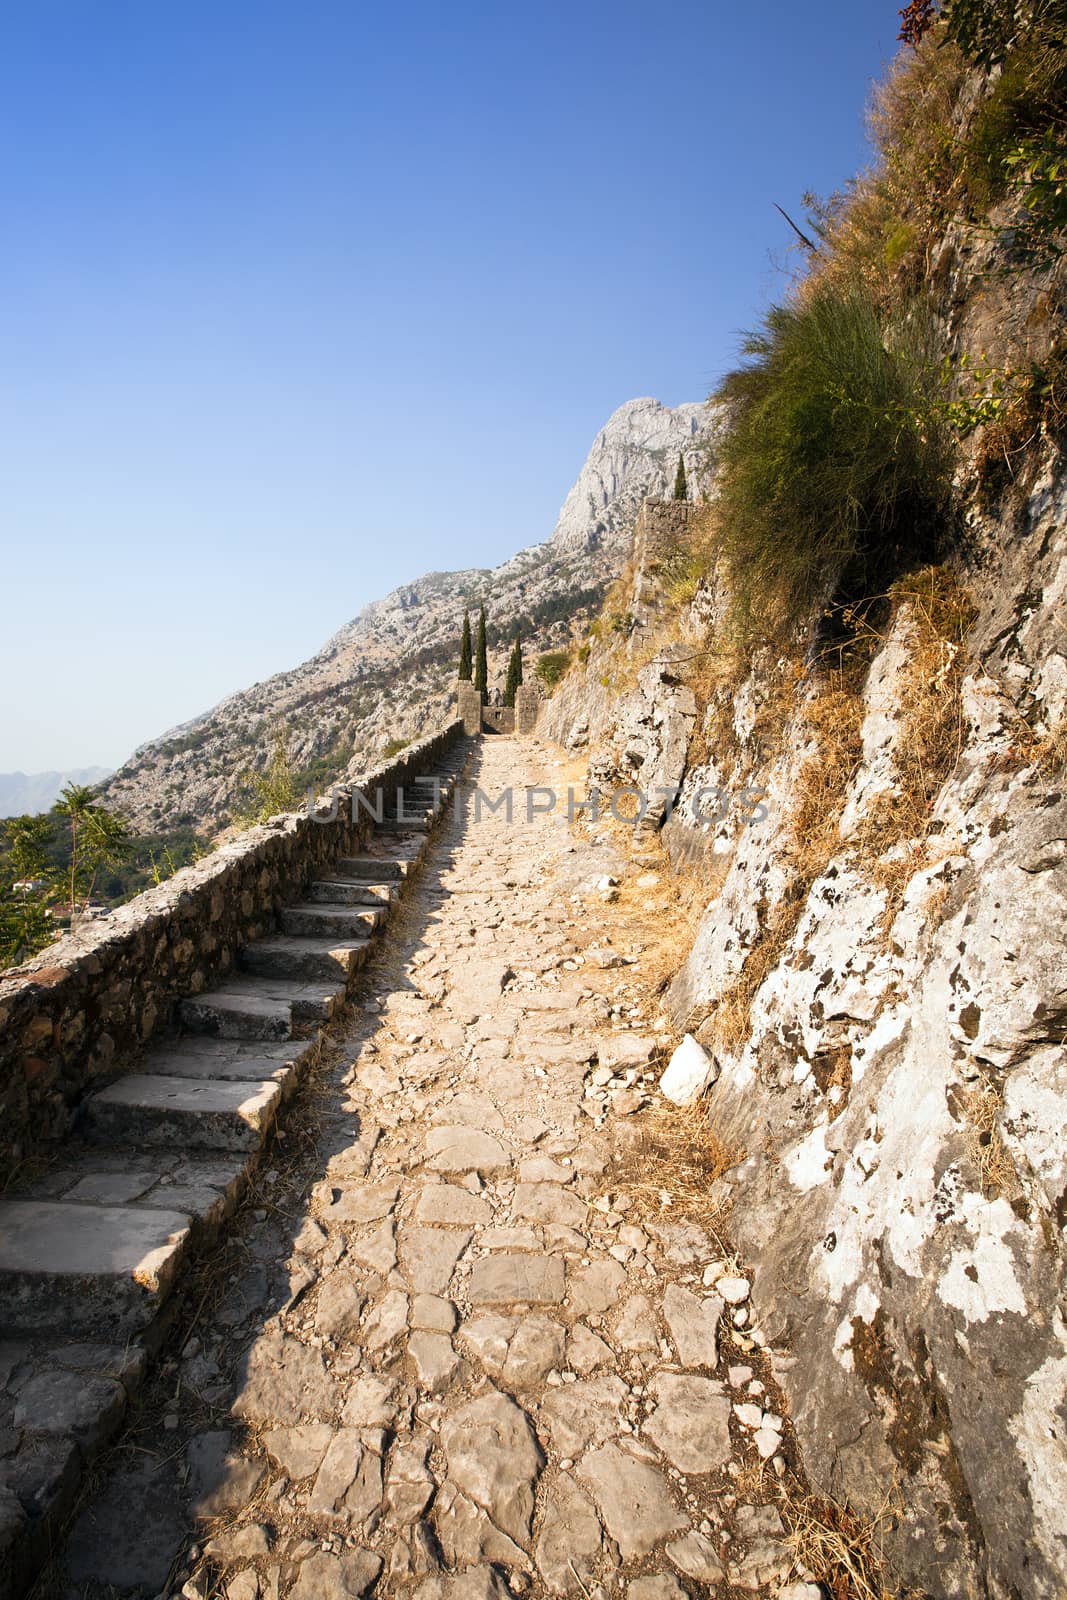   ruins of the fortress located in the city of Kotor, Montenegro